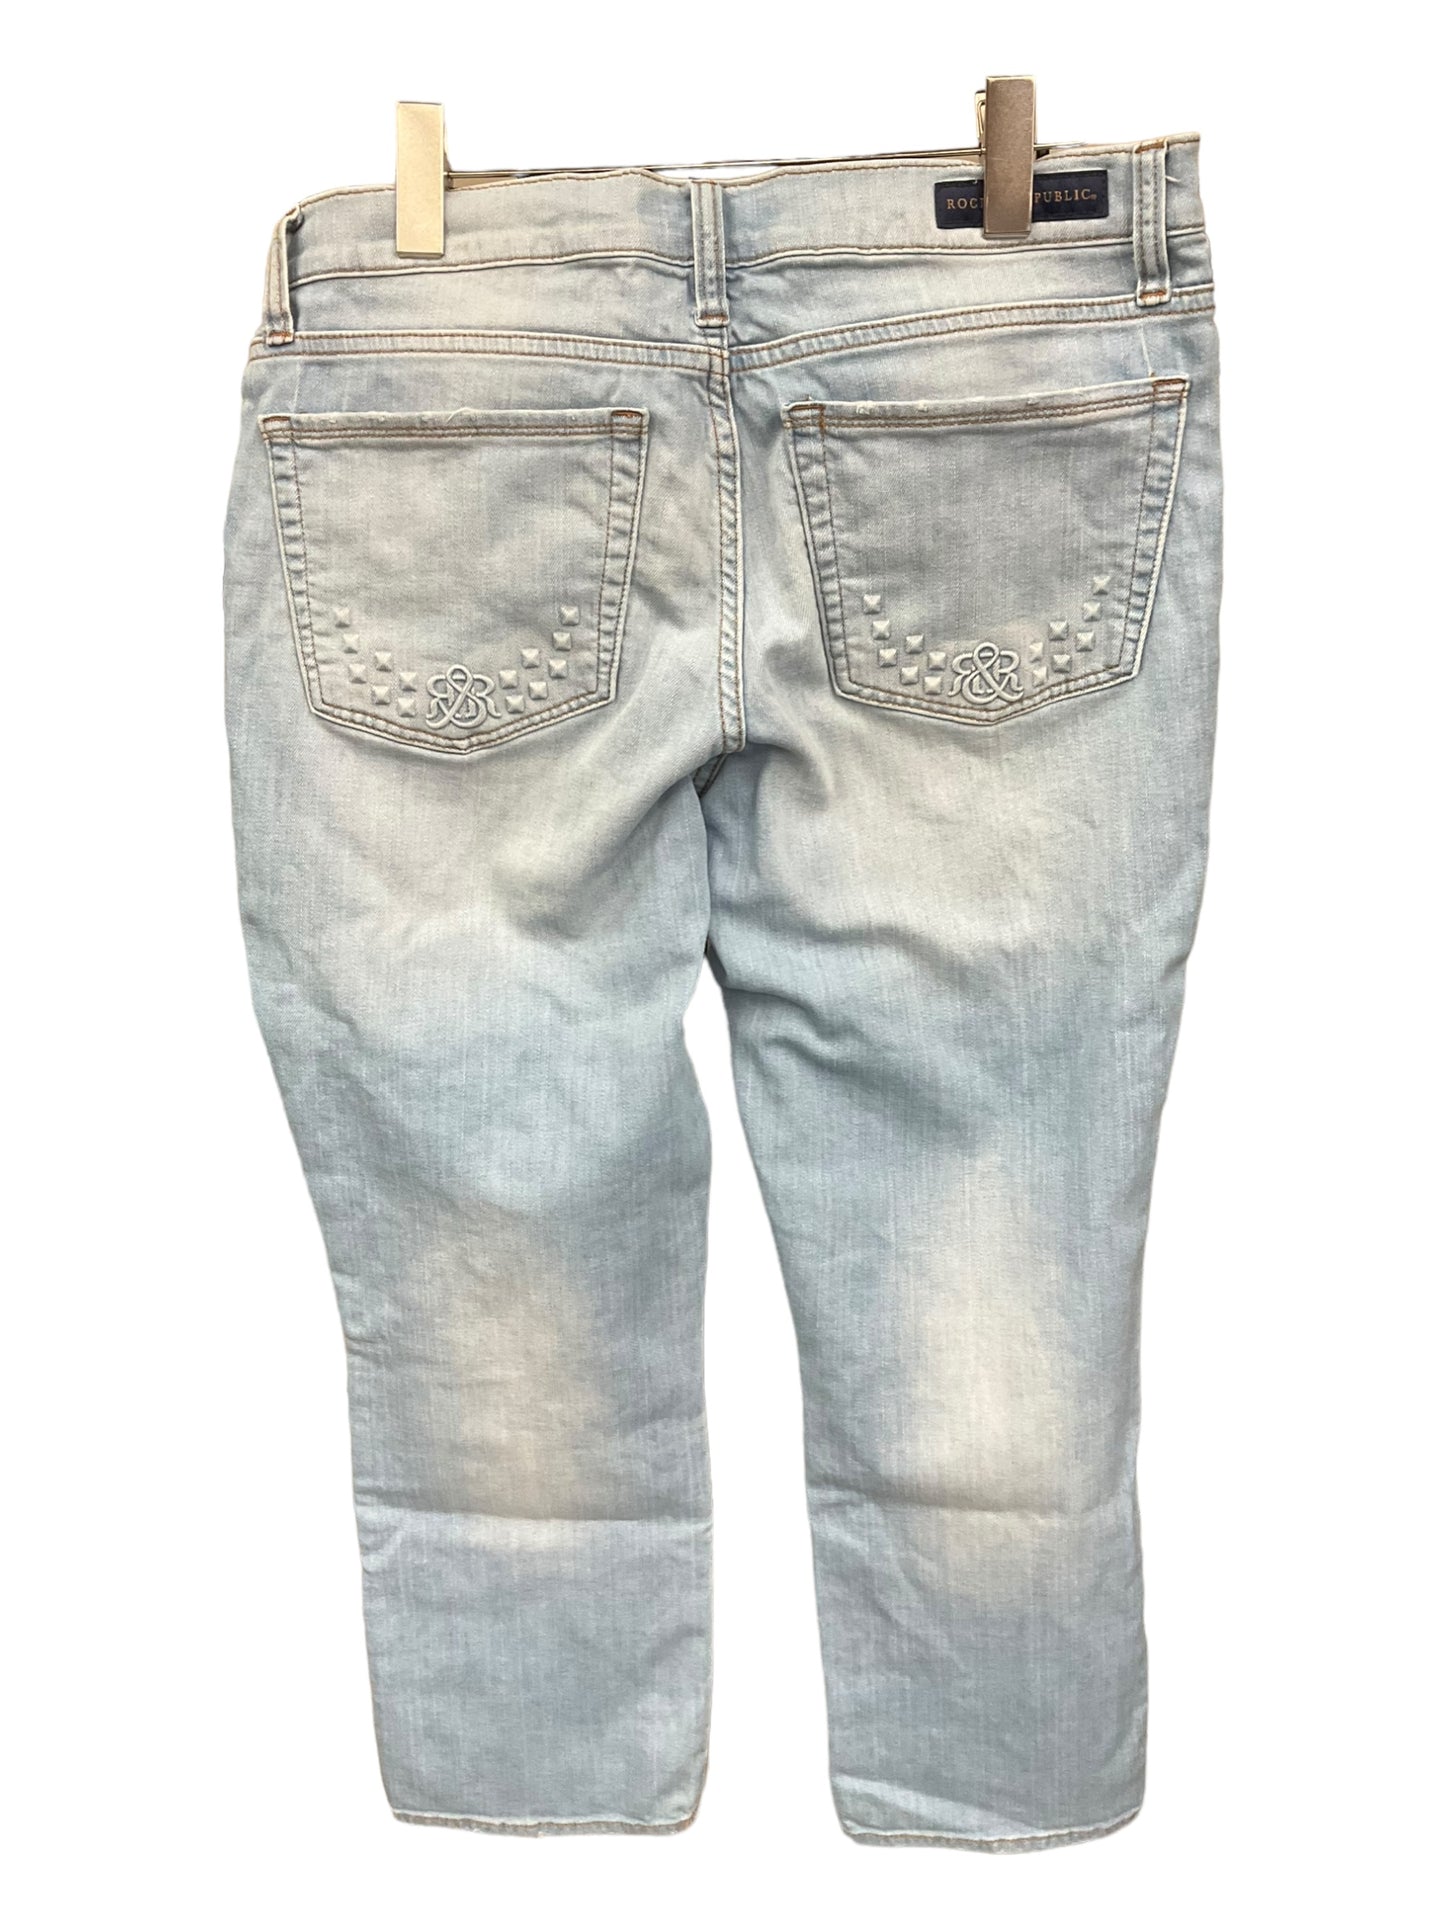 Jeans Cropped By Rock And Republic  Size: 14